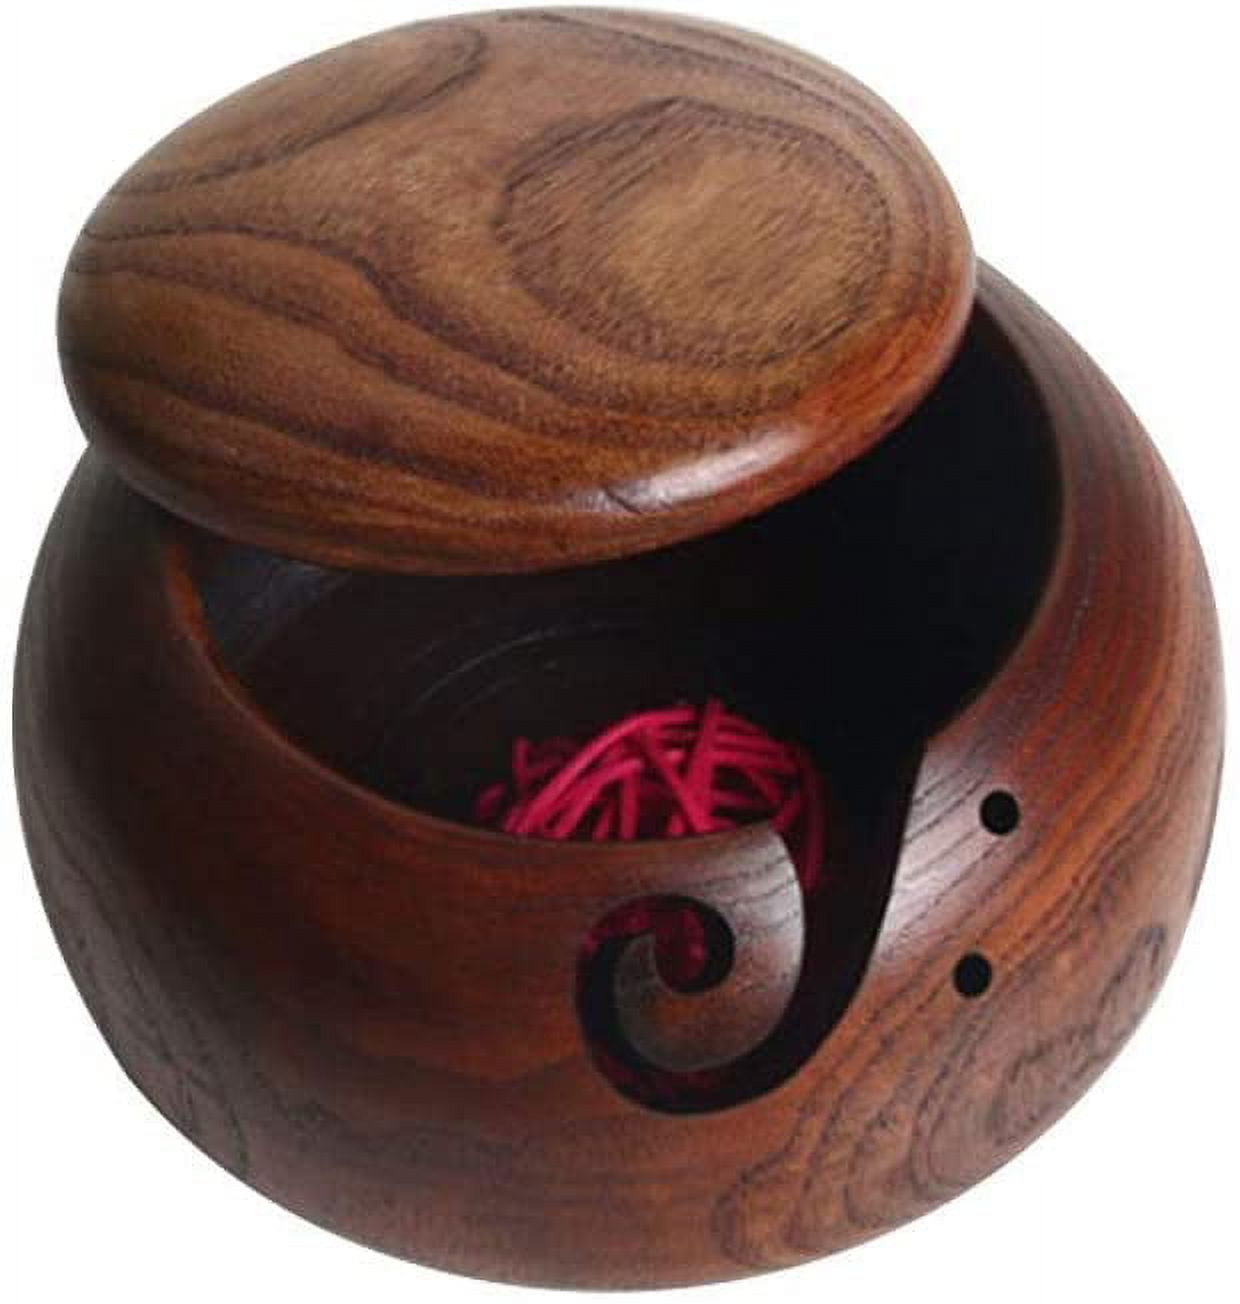 Large yarn bowl with lid. (11 inch diameter). By Earth a Wool and Fire.